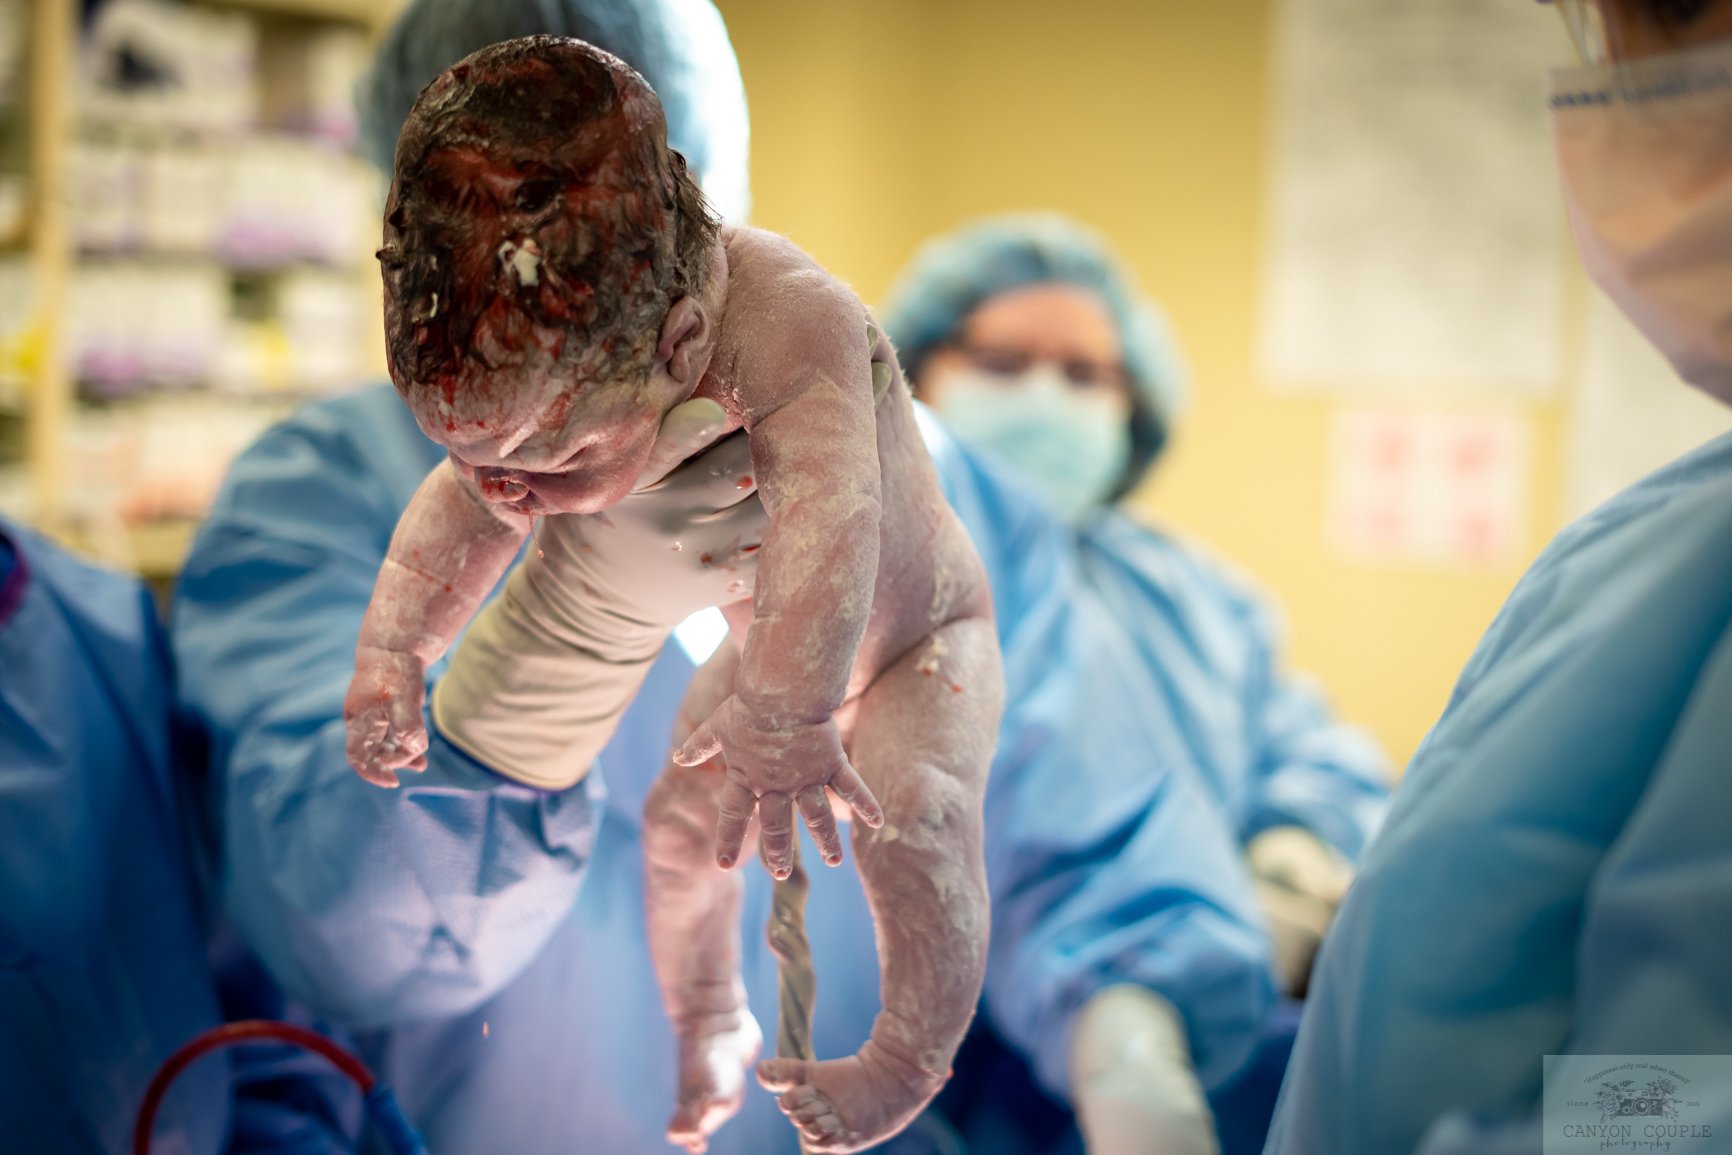  Edgar Hawk takes his first breath as he is delivered via C-section. Christopher snapped this photo in the operating room. 